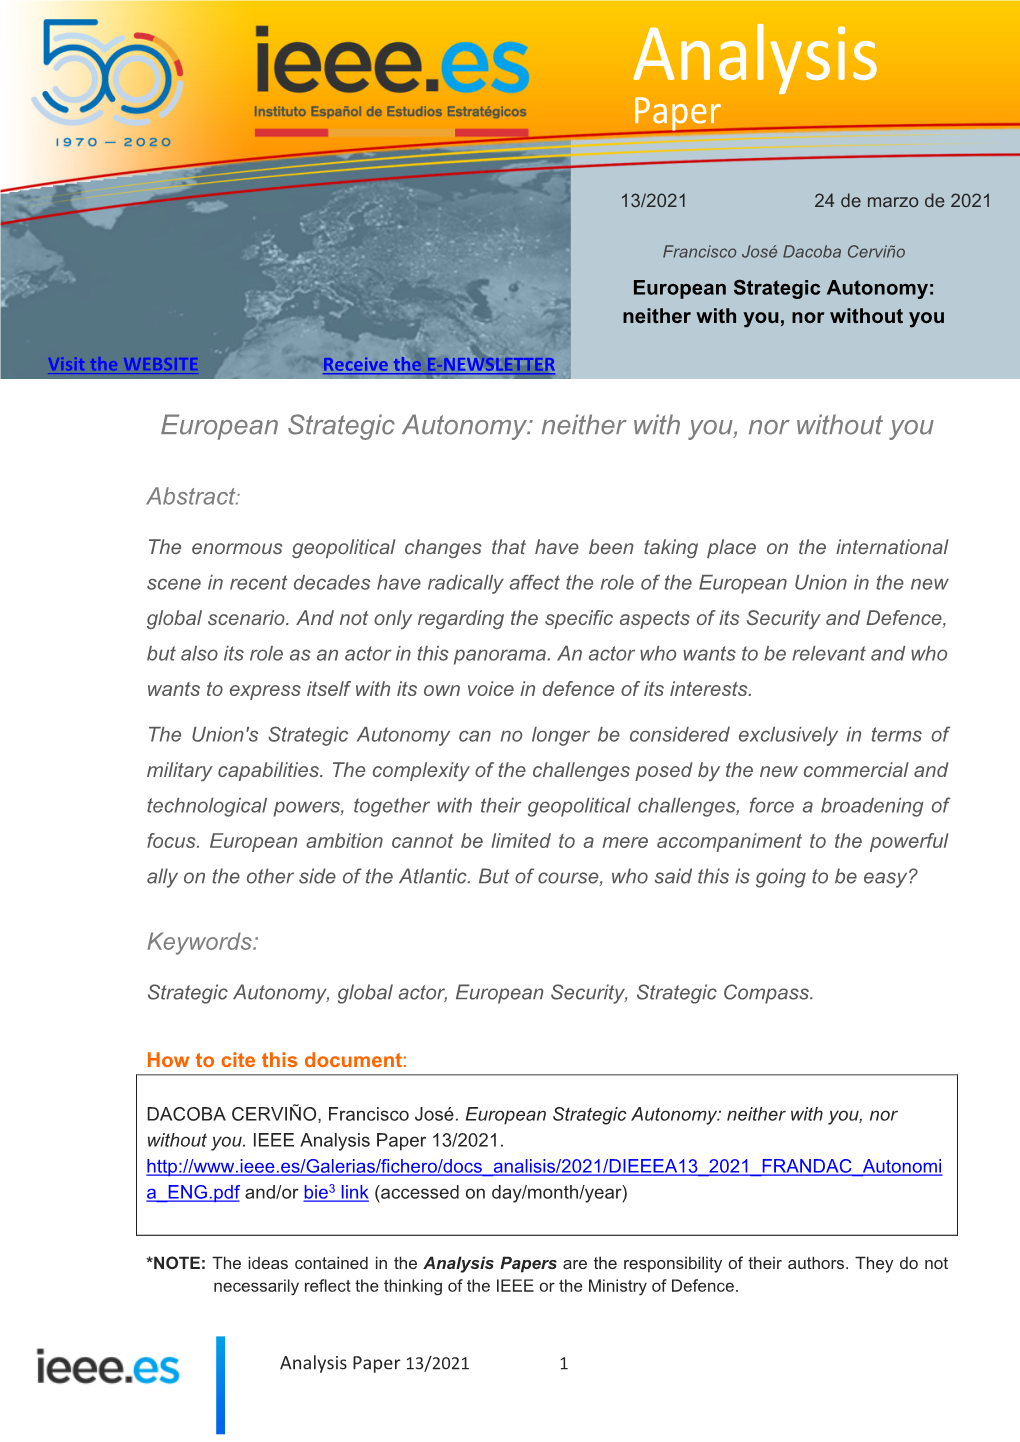 European Strategic Autonomy: Neither with You, Nor Without You